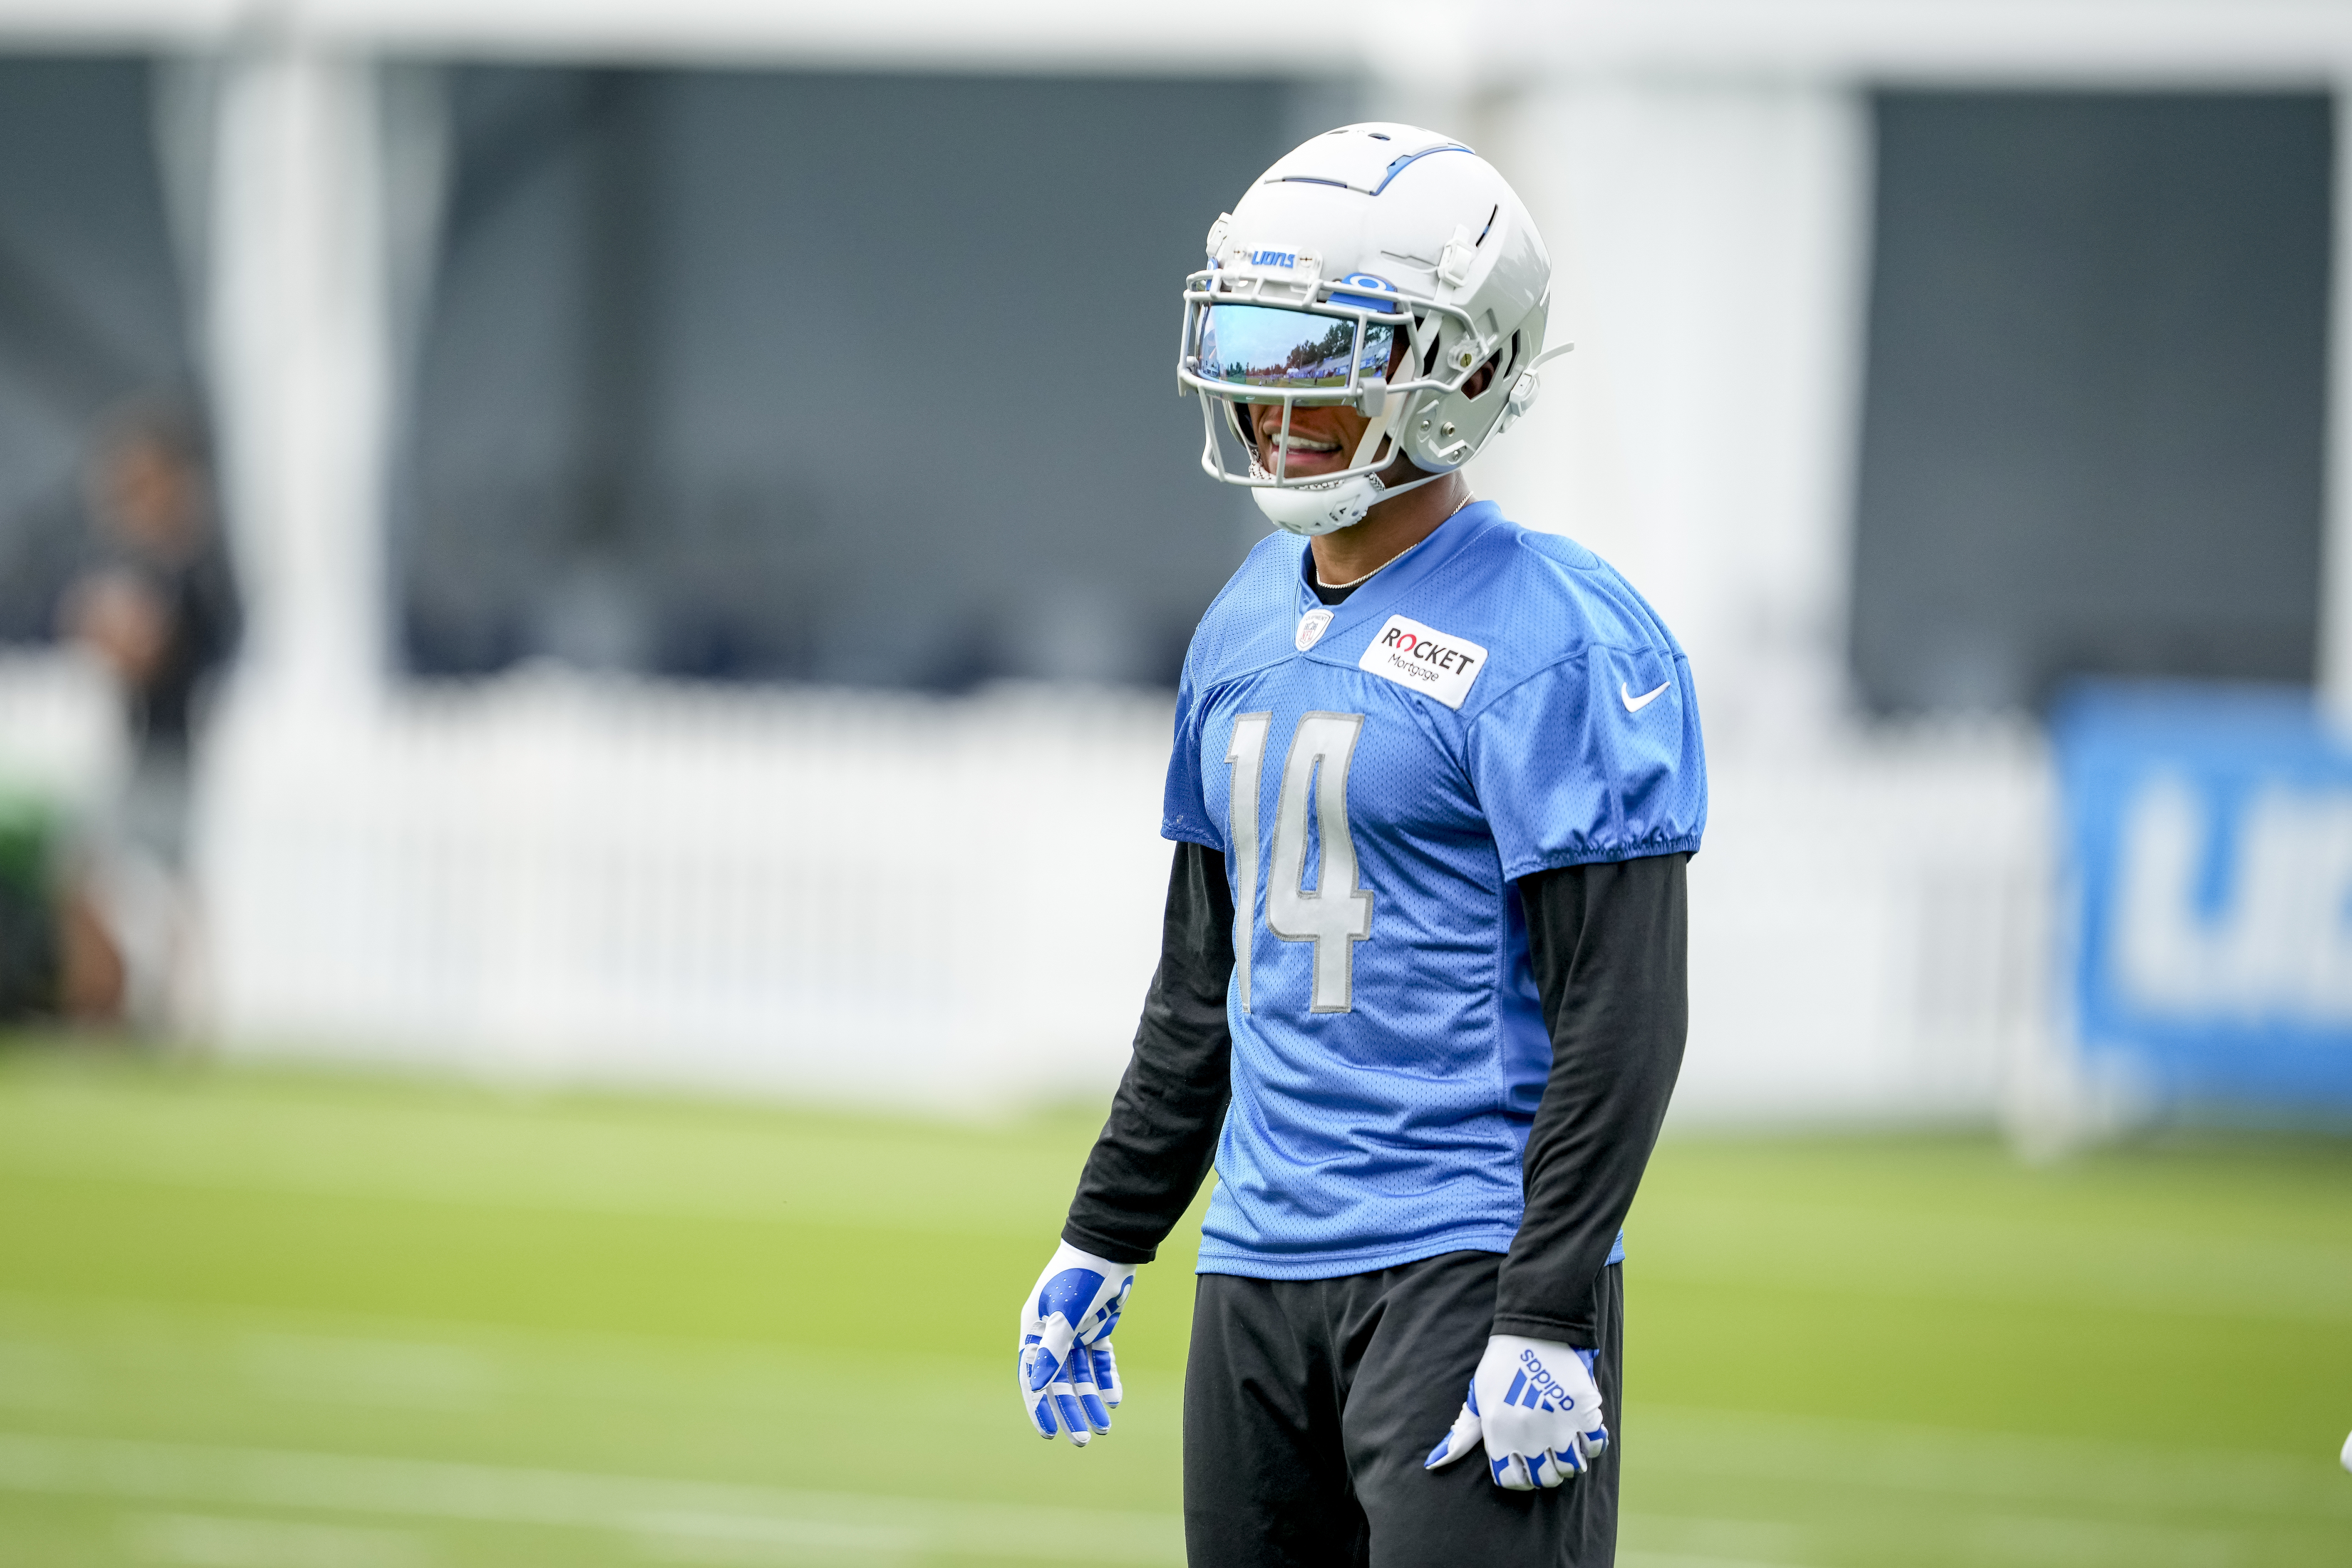 Amon-Ra St. Brown #14 looks on during the Detroit Lions Training Camp on July 27, 2022 in Allen Park, Michigan.